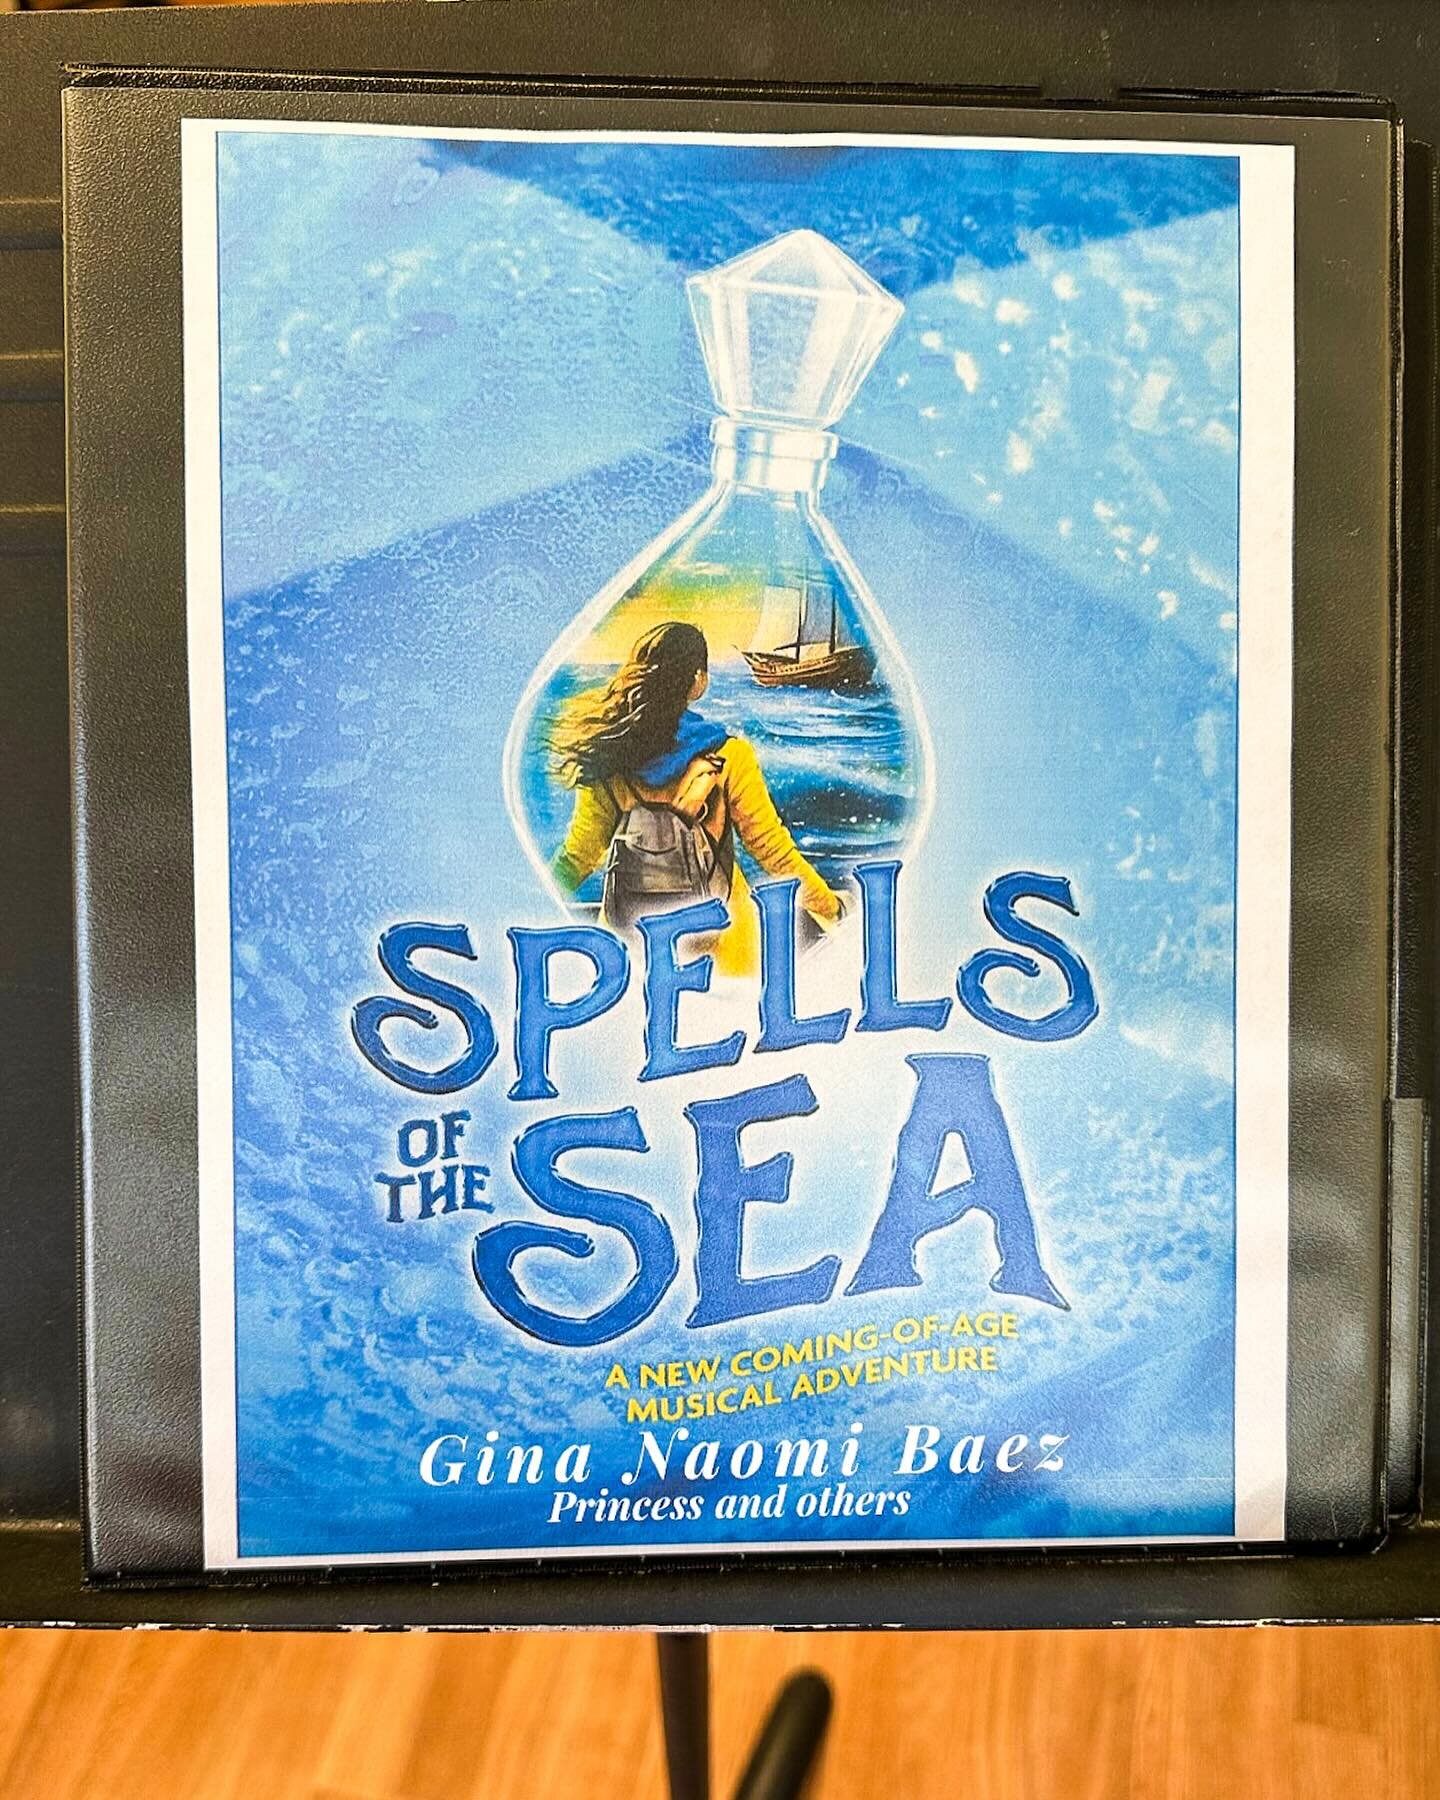 It&rsquo;s Offi-SHELL! 🐚🌊👸🏽🎭✨💕

✨First day of school for this magical new musical @spellsofthesea with this incredible cast and creative team! So grateful to be a part of this!!! 

#spellsofthesea #seamusic #behindthesea #musicaltheatre #newmus